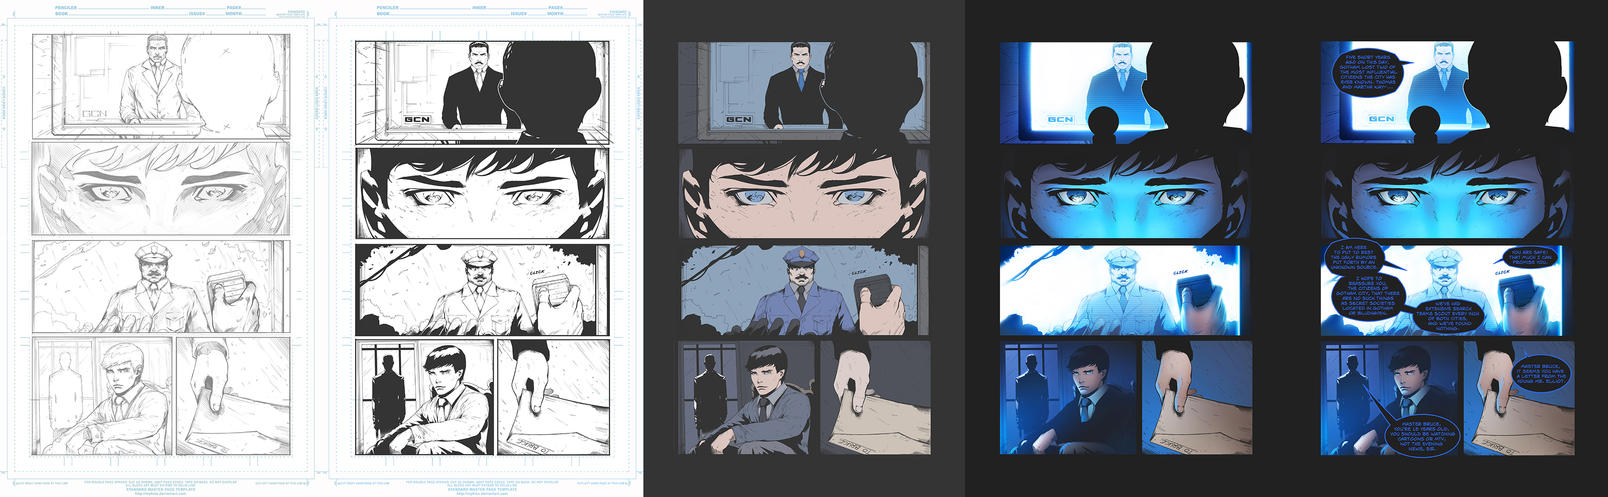 [Image: before_the_knight___page_1___process_by_...abo59g.jpg]